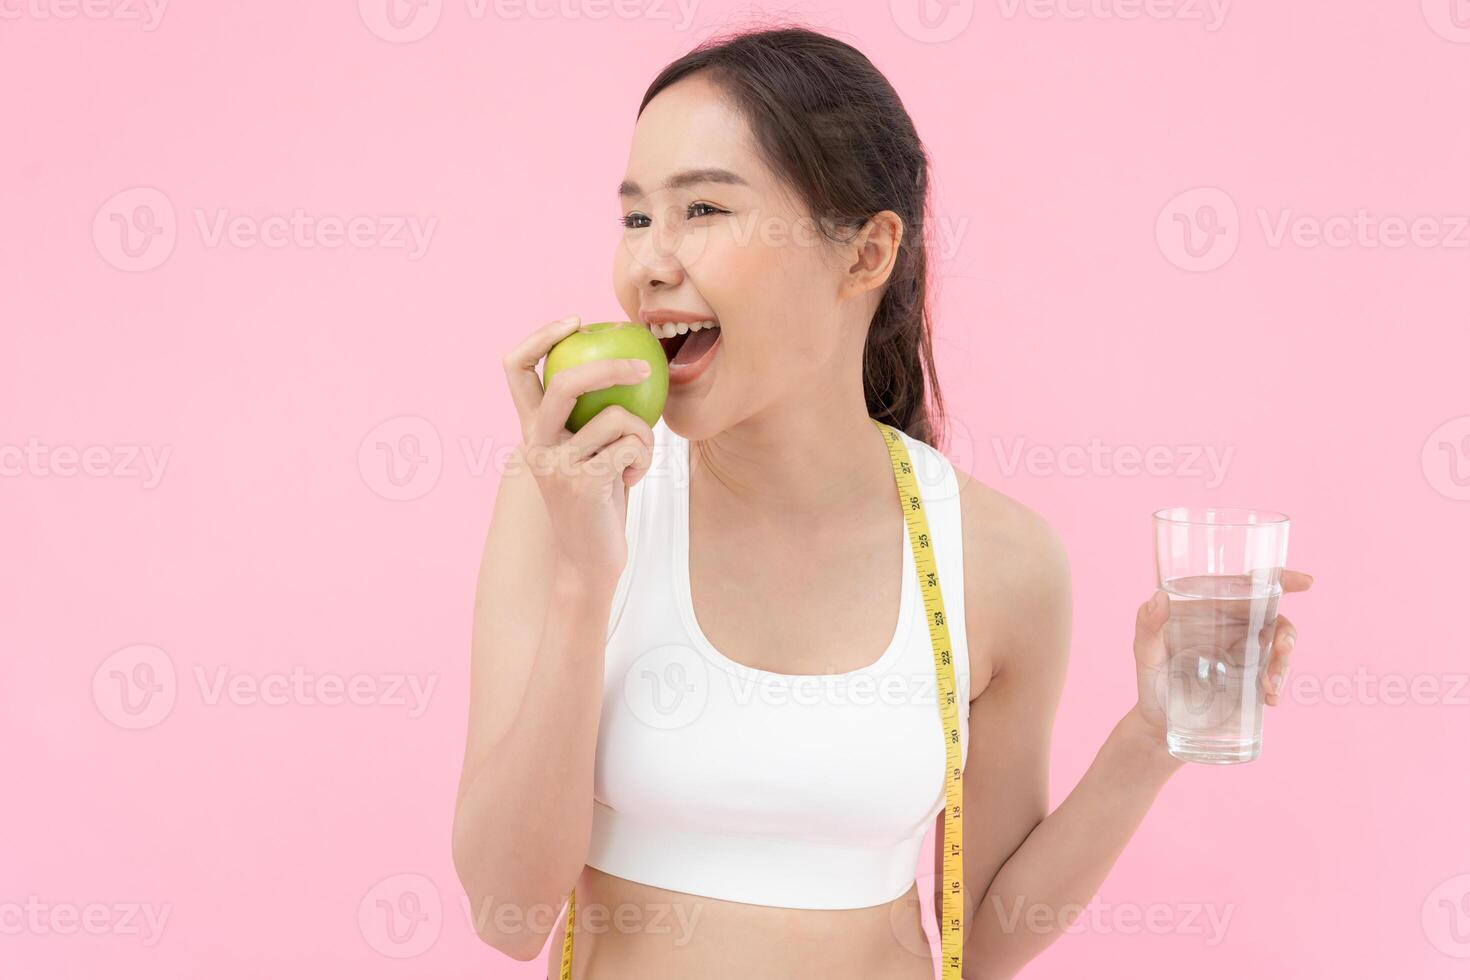 slim body asian women choose healthy foods, dieting female choose green apple for diet. Good healthy food. weight lose, balance, control, reduce fat, low calories, routines, exercise, body shape. photo